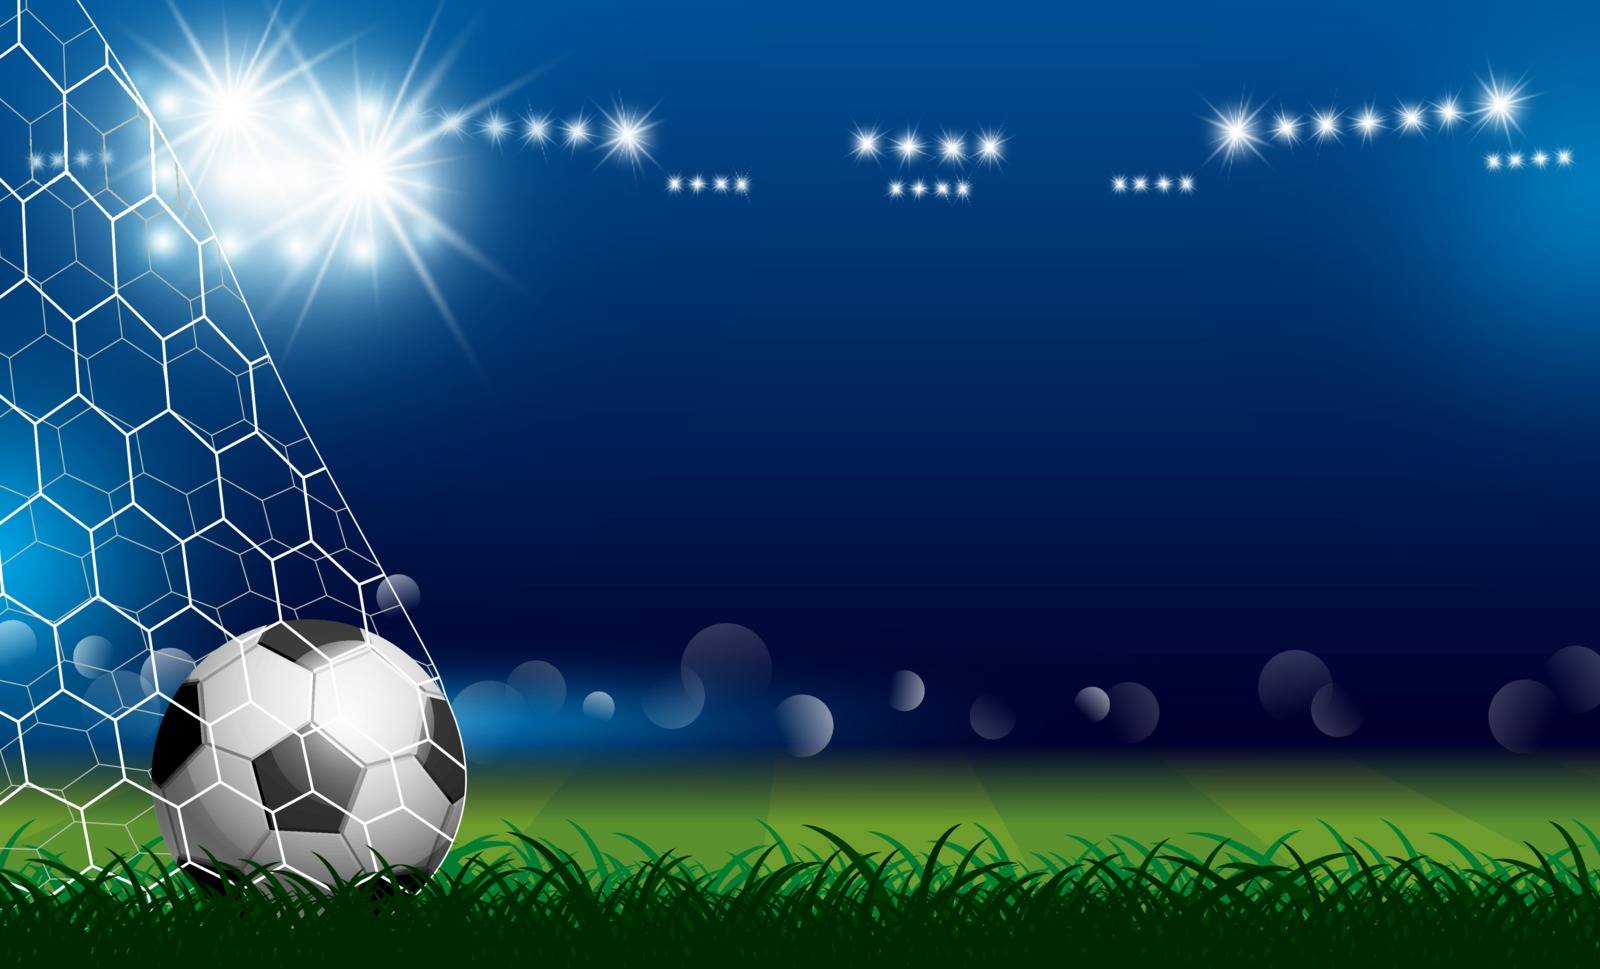 Soccer ball in goal on grass with spotlight vector illustration by Myimagine